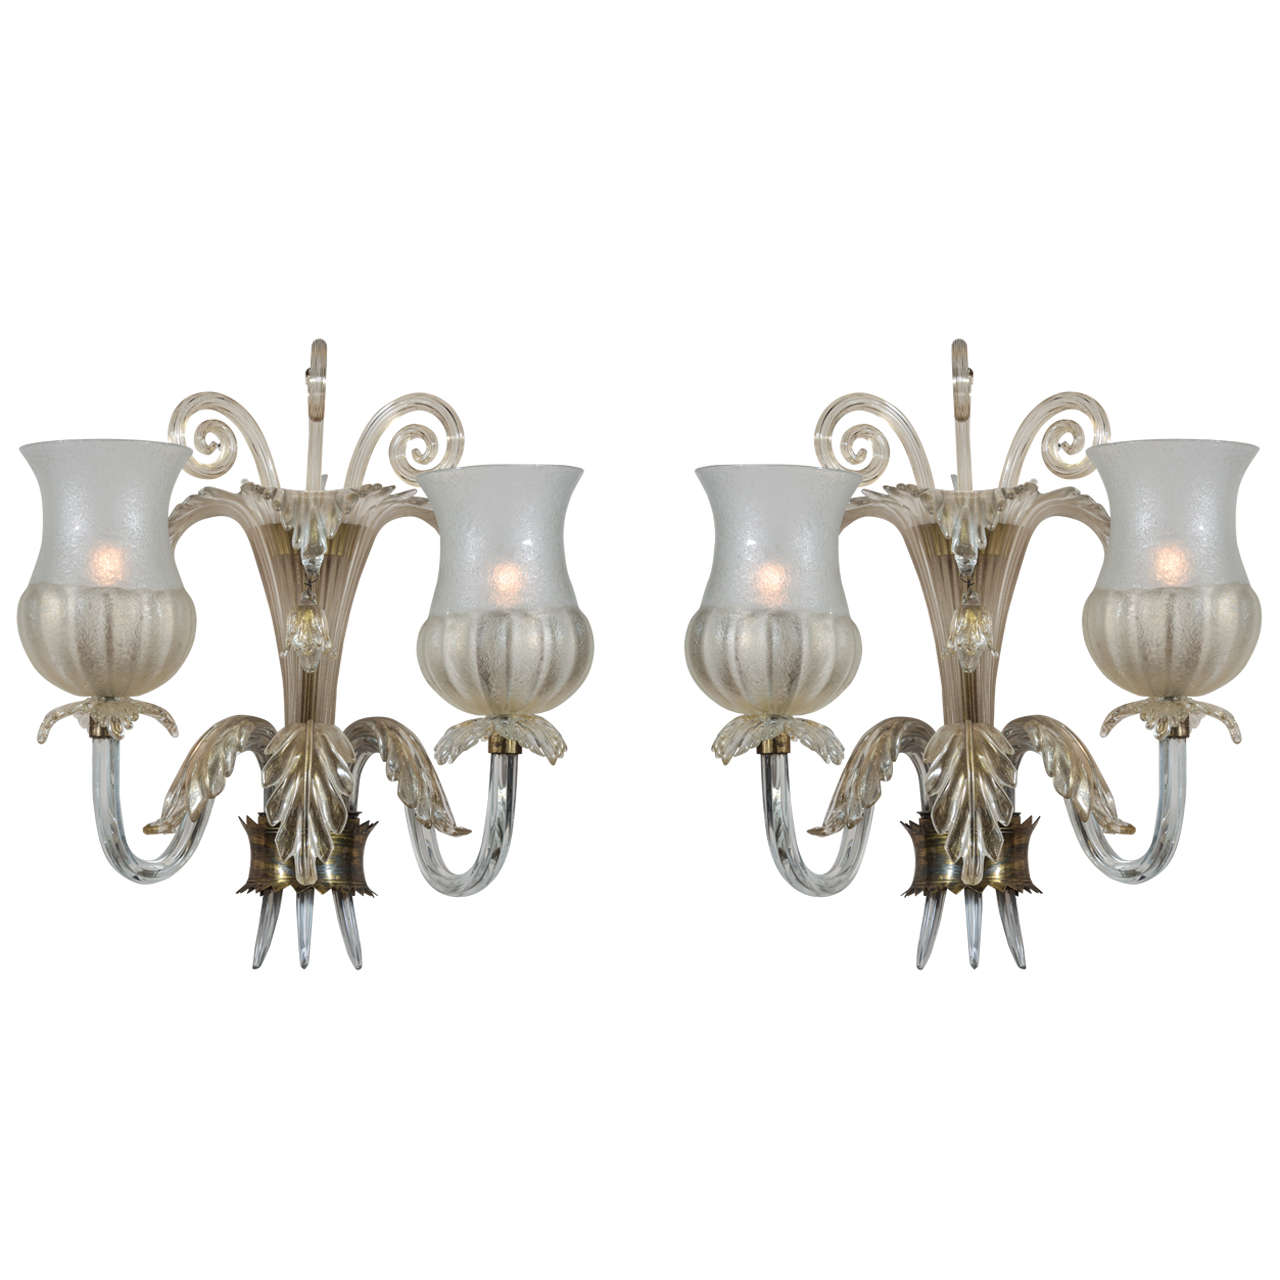 Pair of Fume 2 Arm Murano Glass Sconces by Seguso For Sale